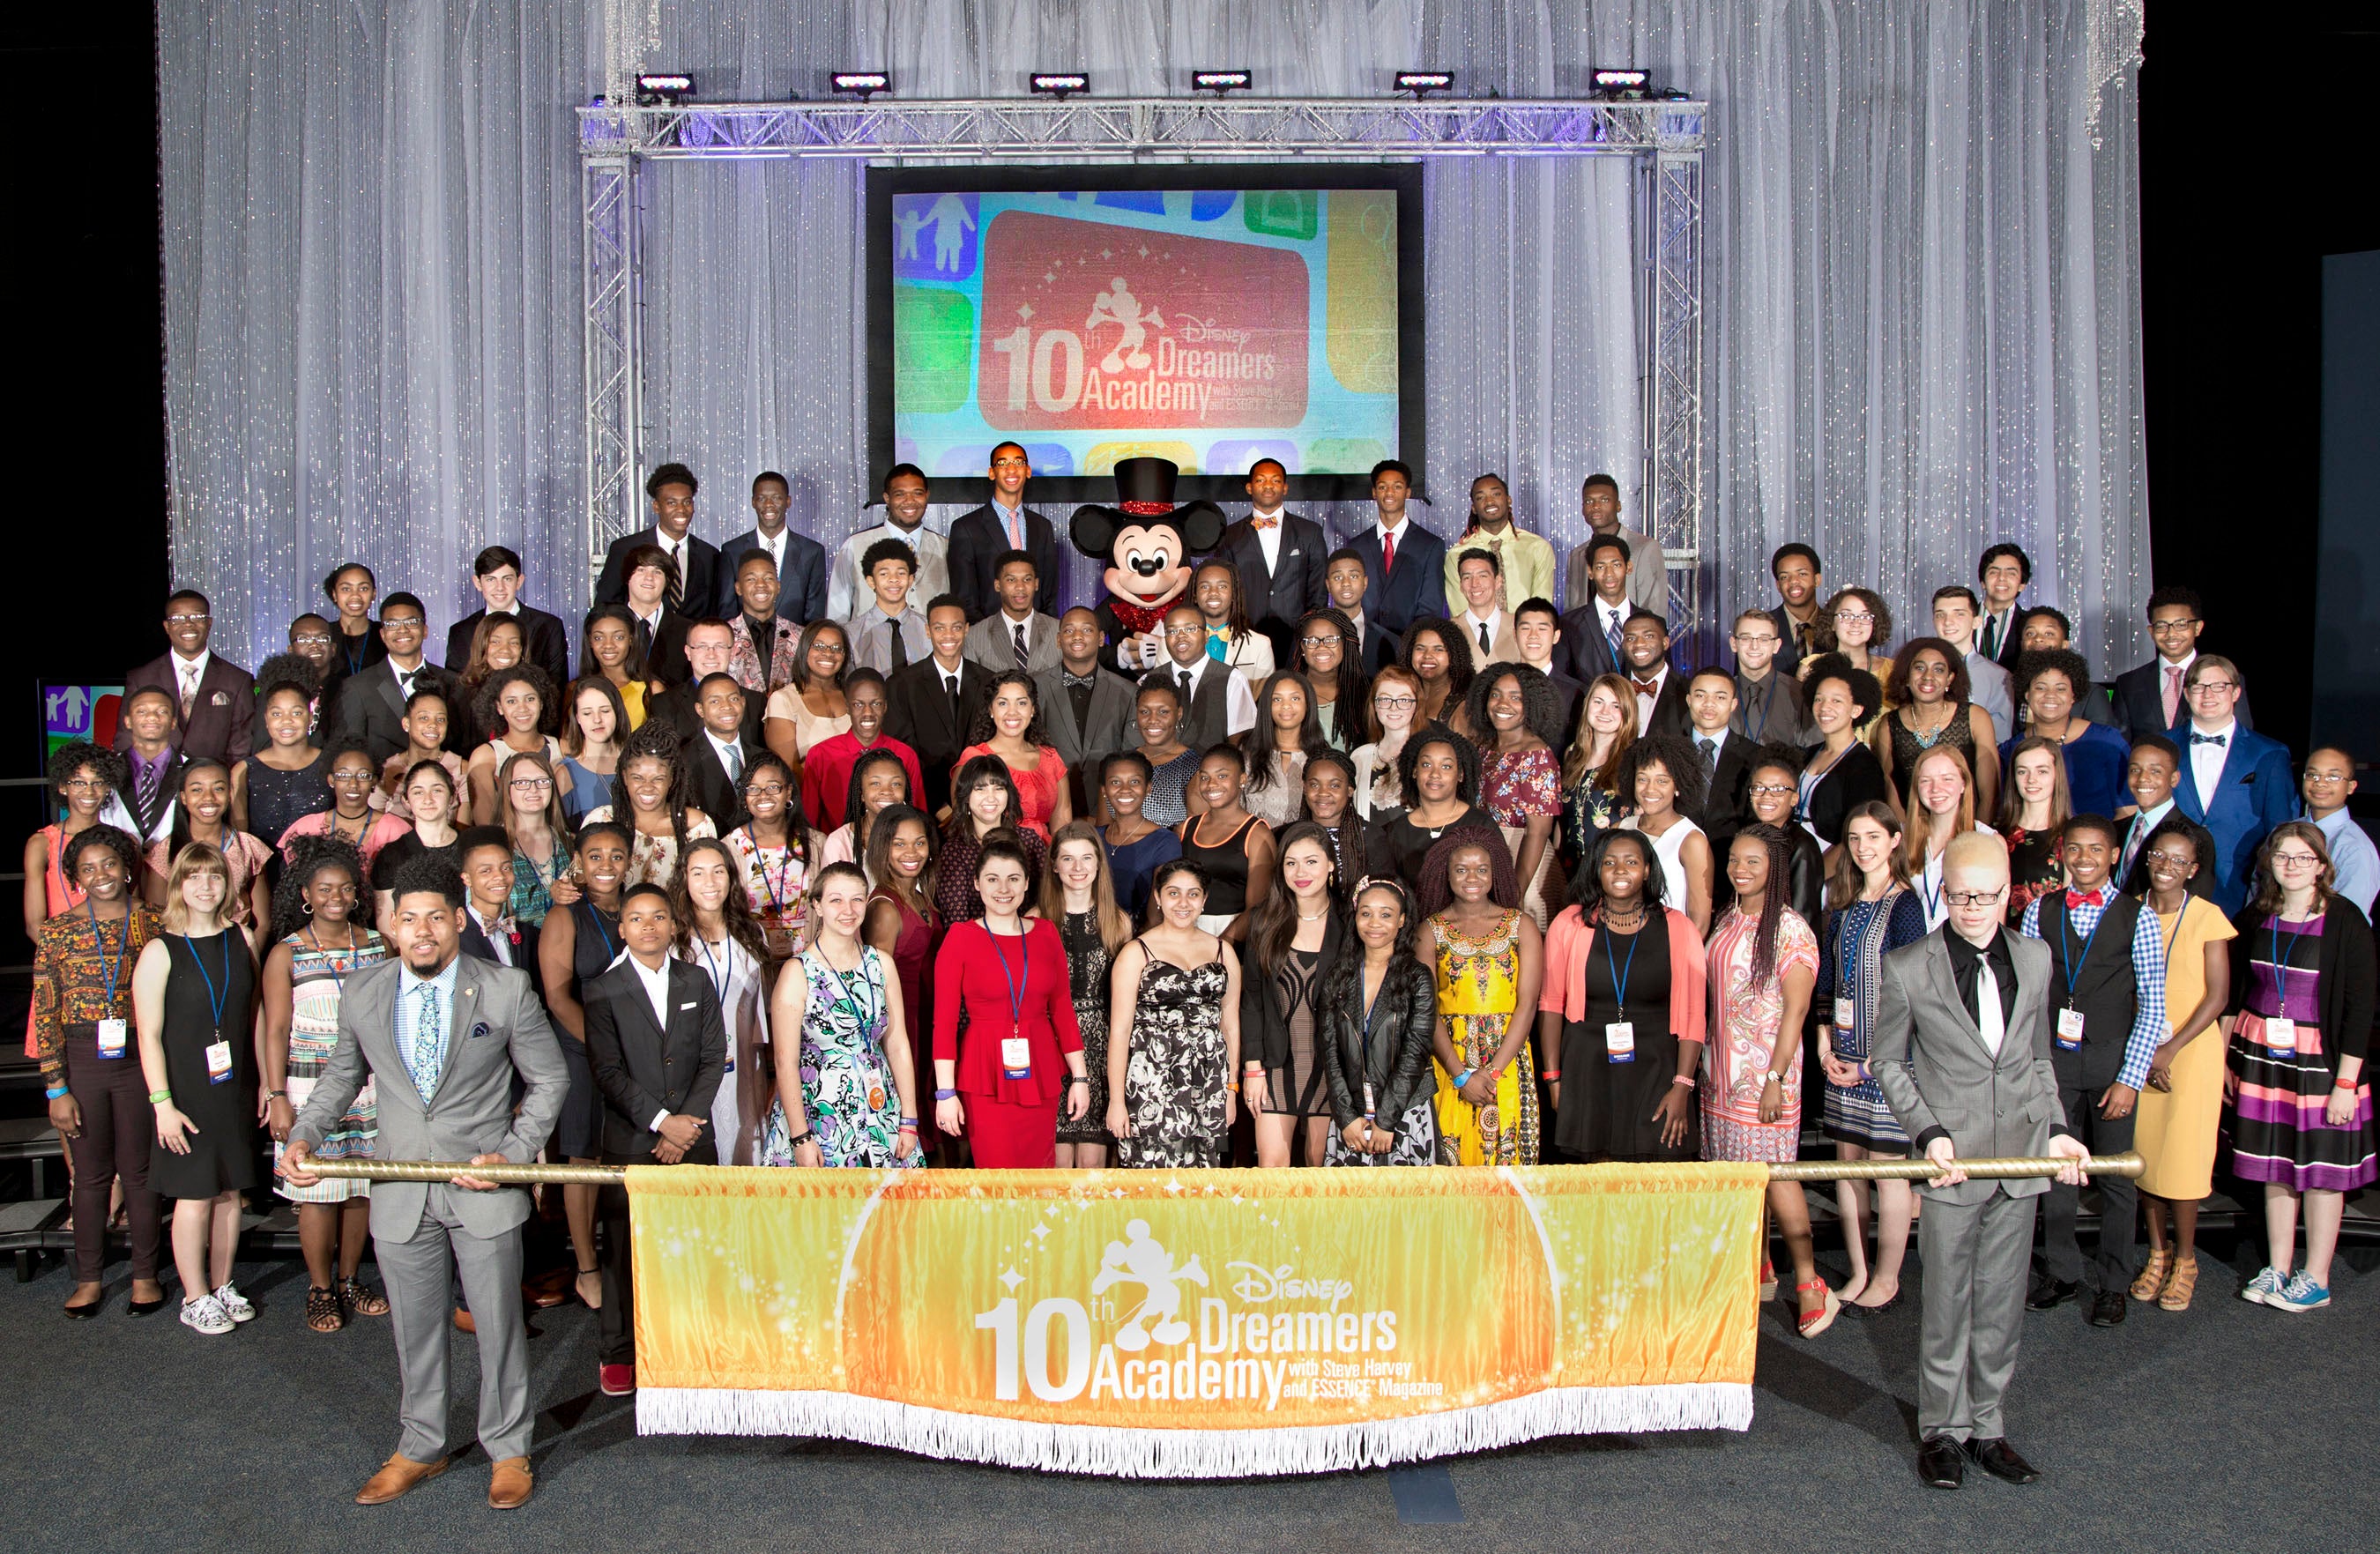 The Best Moments From the 10th Annual Disney Dreamers Academy With Steve Harvey